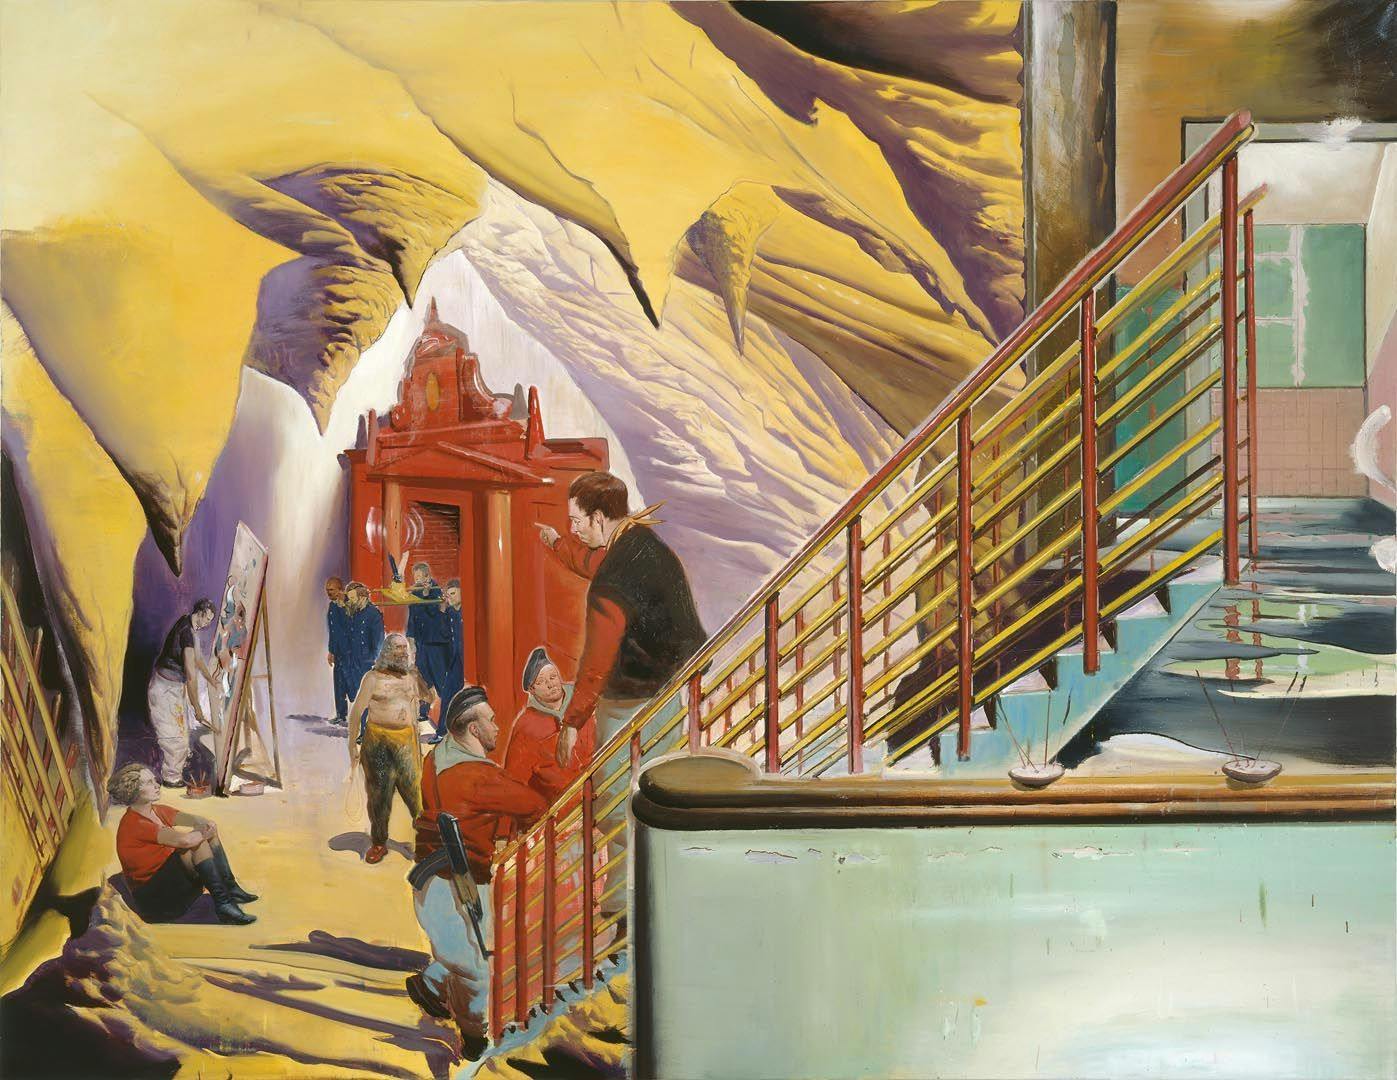 A painting by Neo Rauch, titled Krypta, dated 2005.